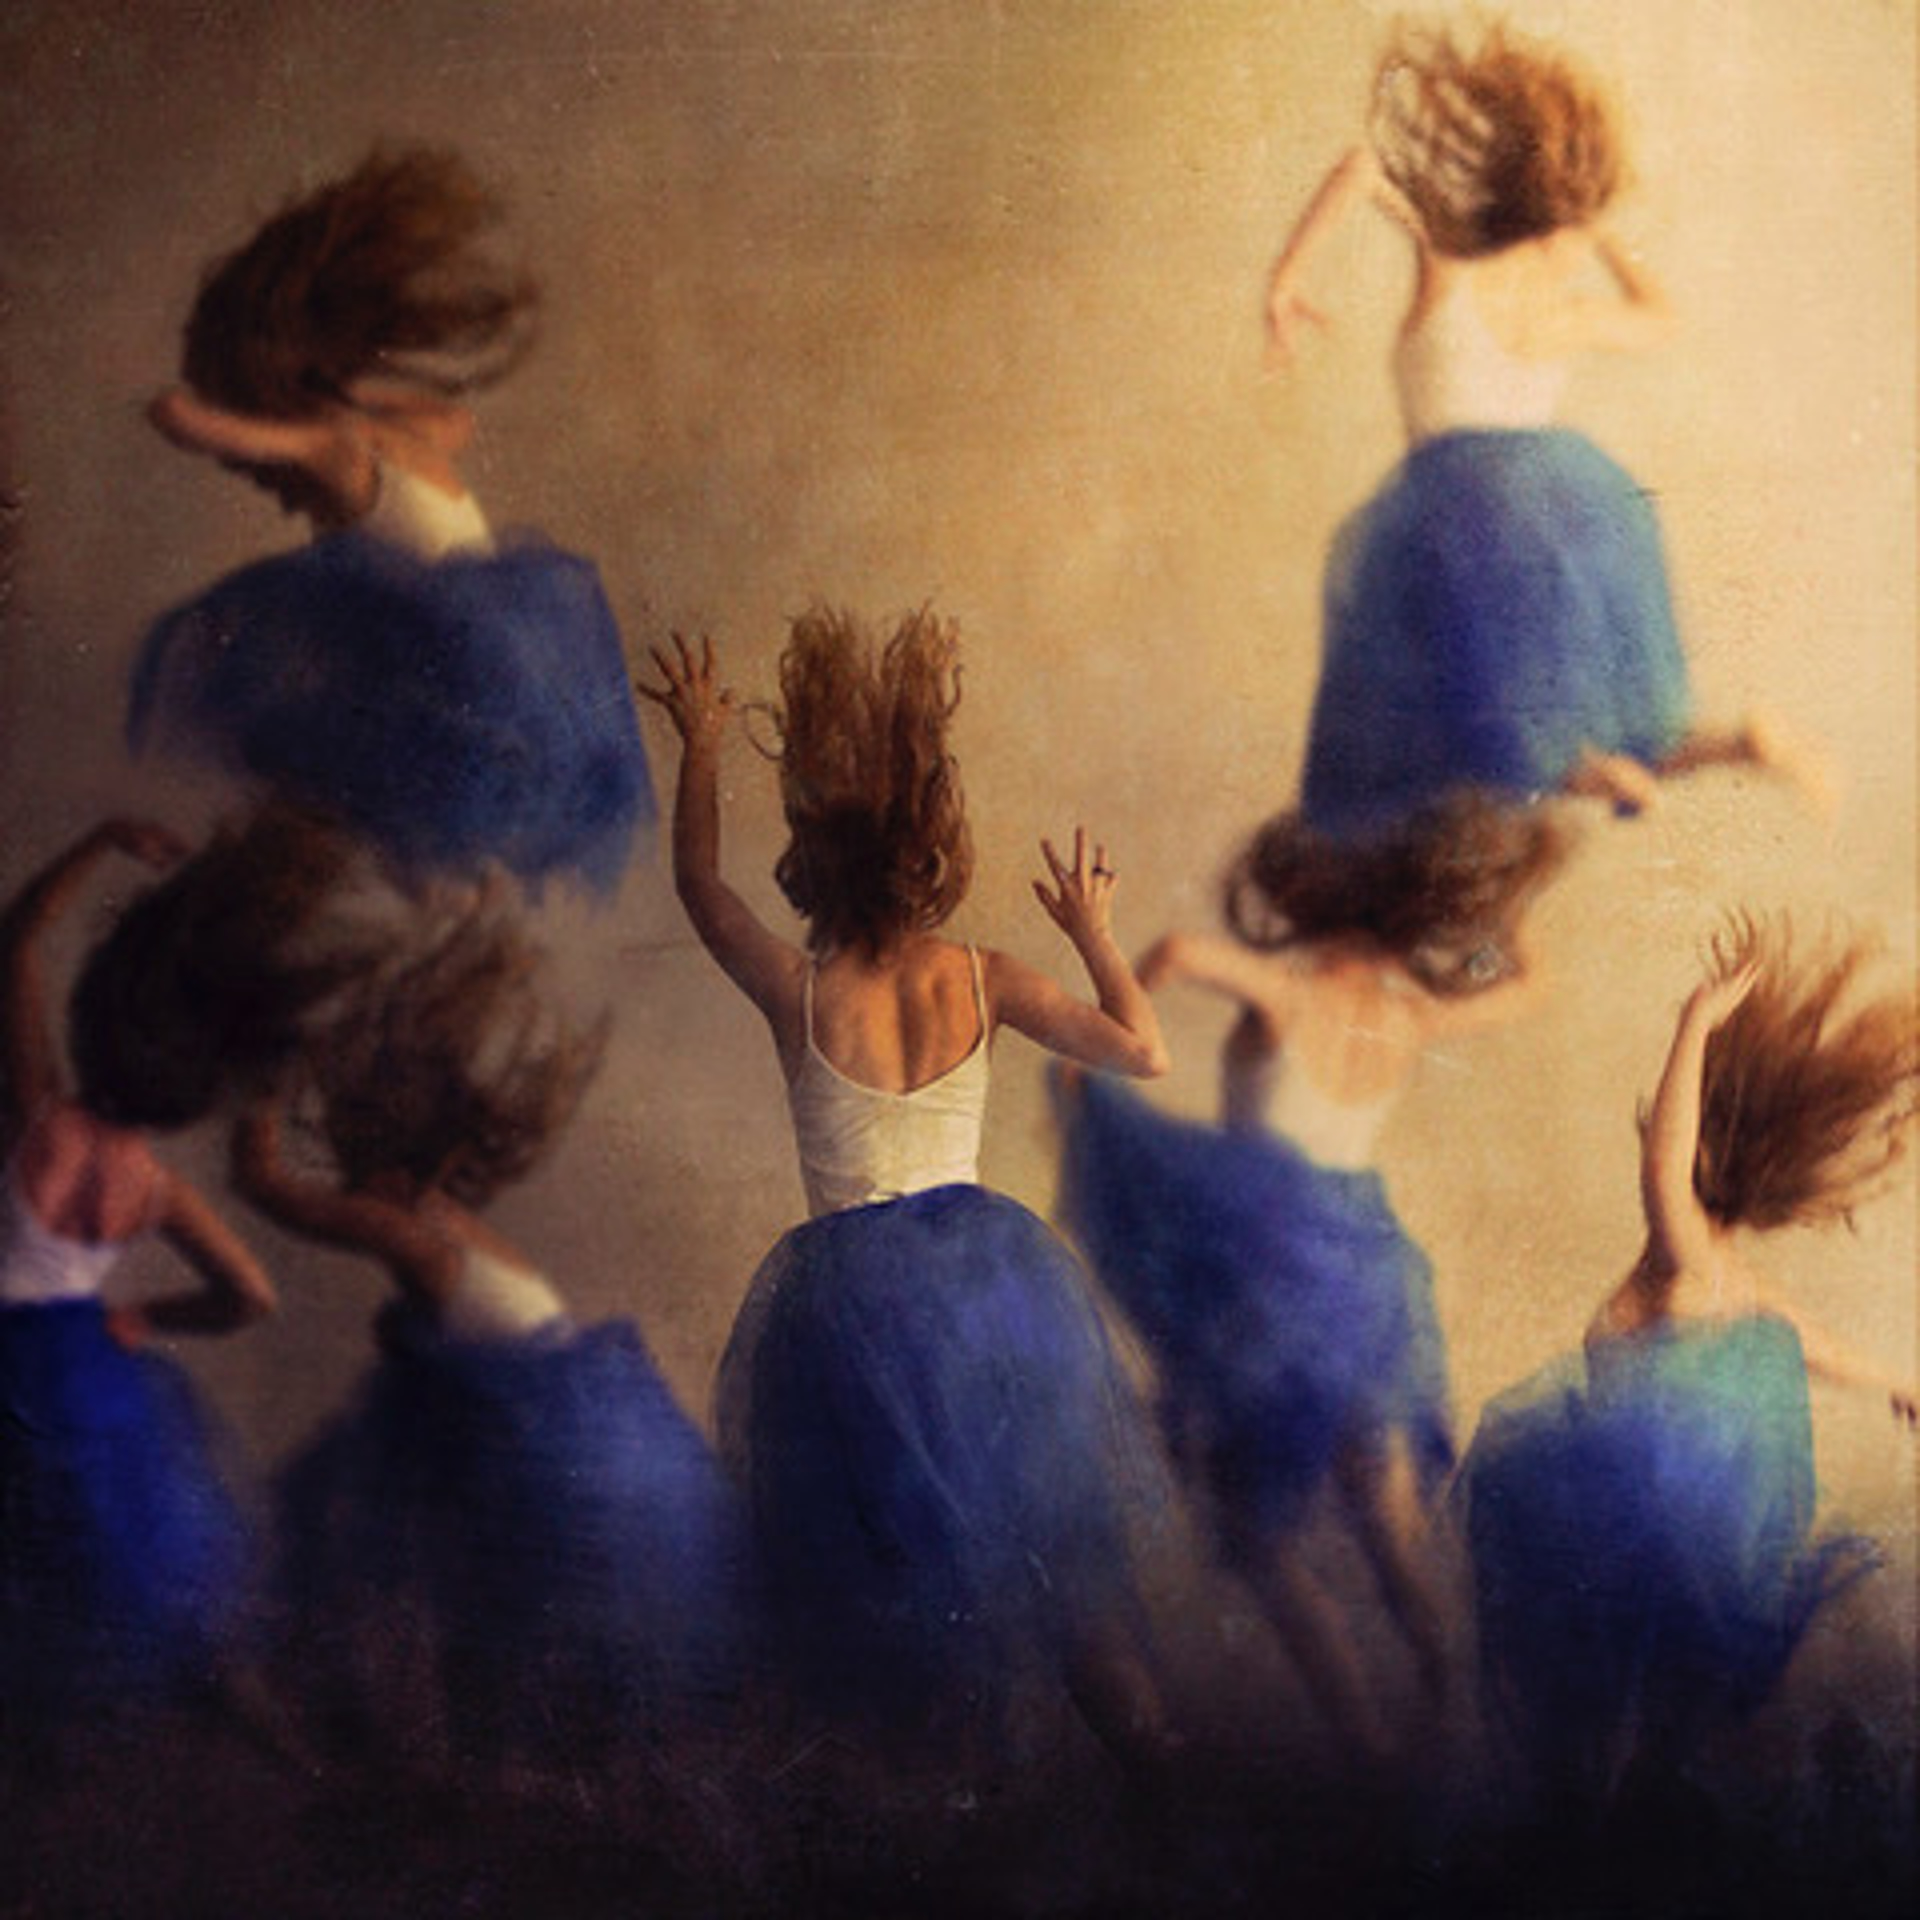 Ballet: Vacate by Brooke Shaden